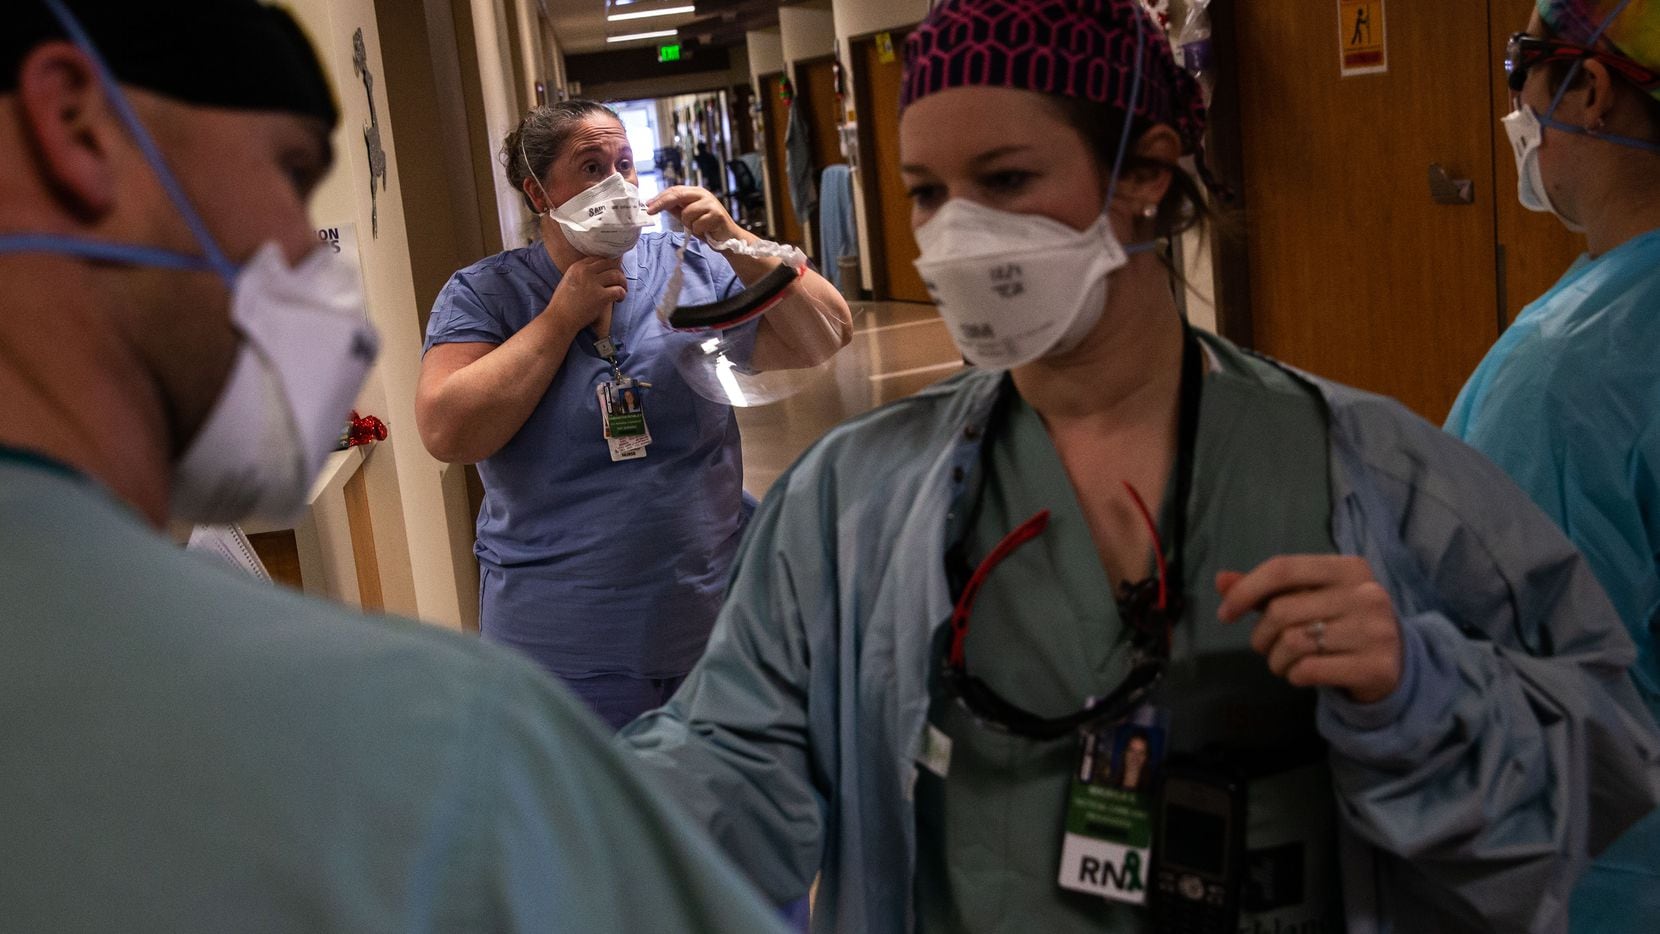 Samantha Rowley (center) suits up with personal protective equipment to help with a...